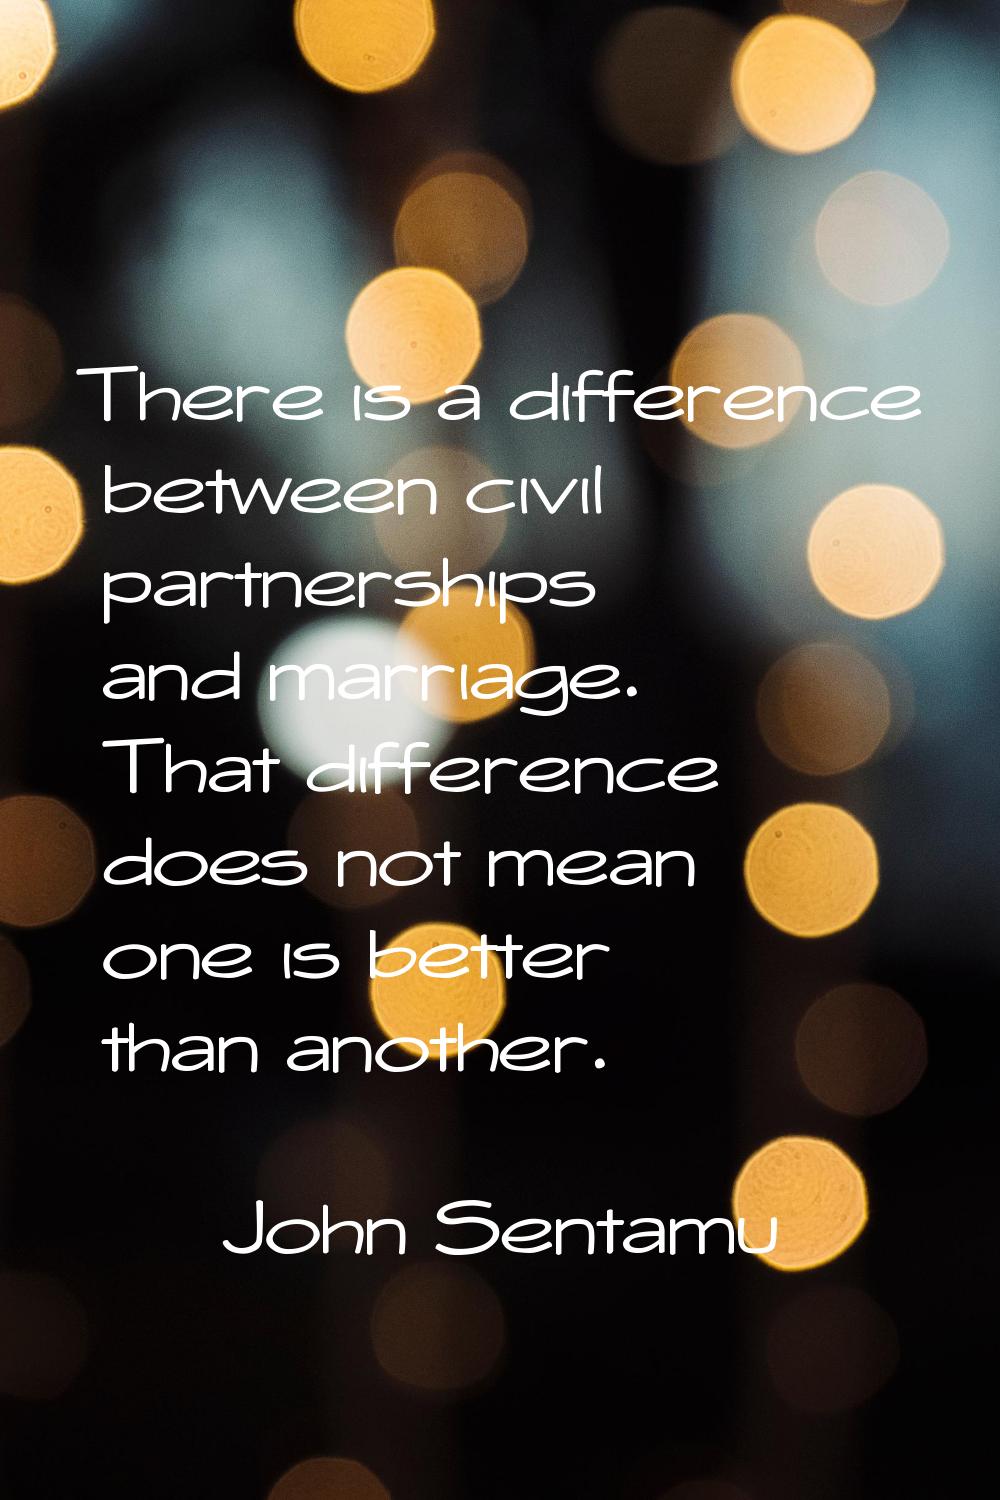 There is a difference between civil partnerships and marriage. That difference does not mean one is